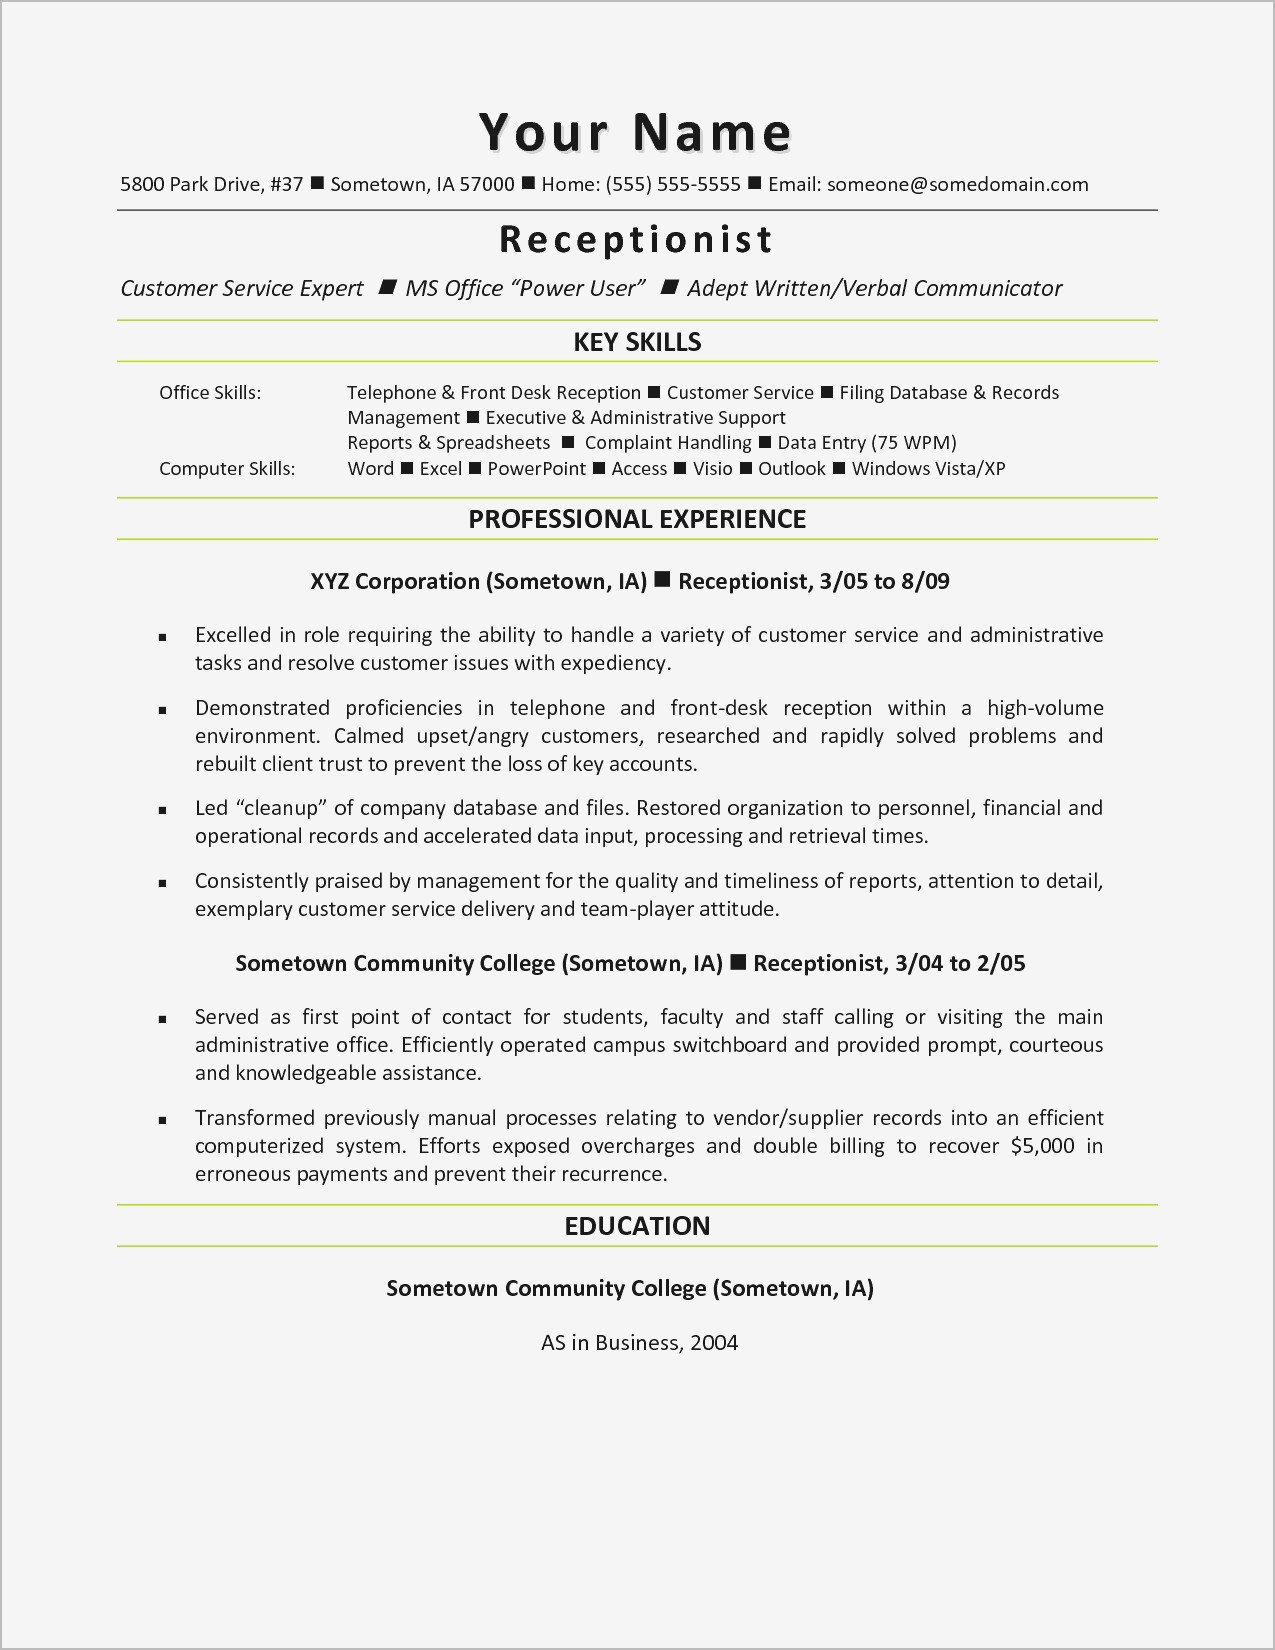 Cover Letter Template for Receptionist - Customer Service Cover Letter Examples Samples